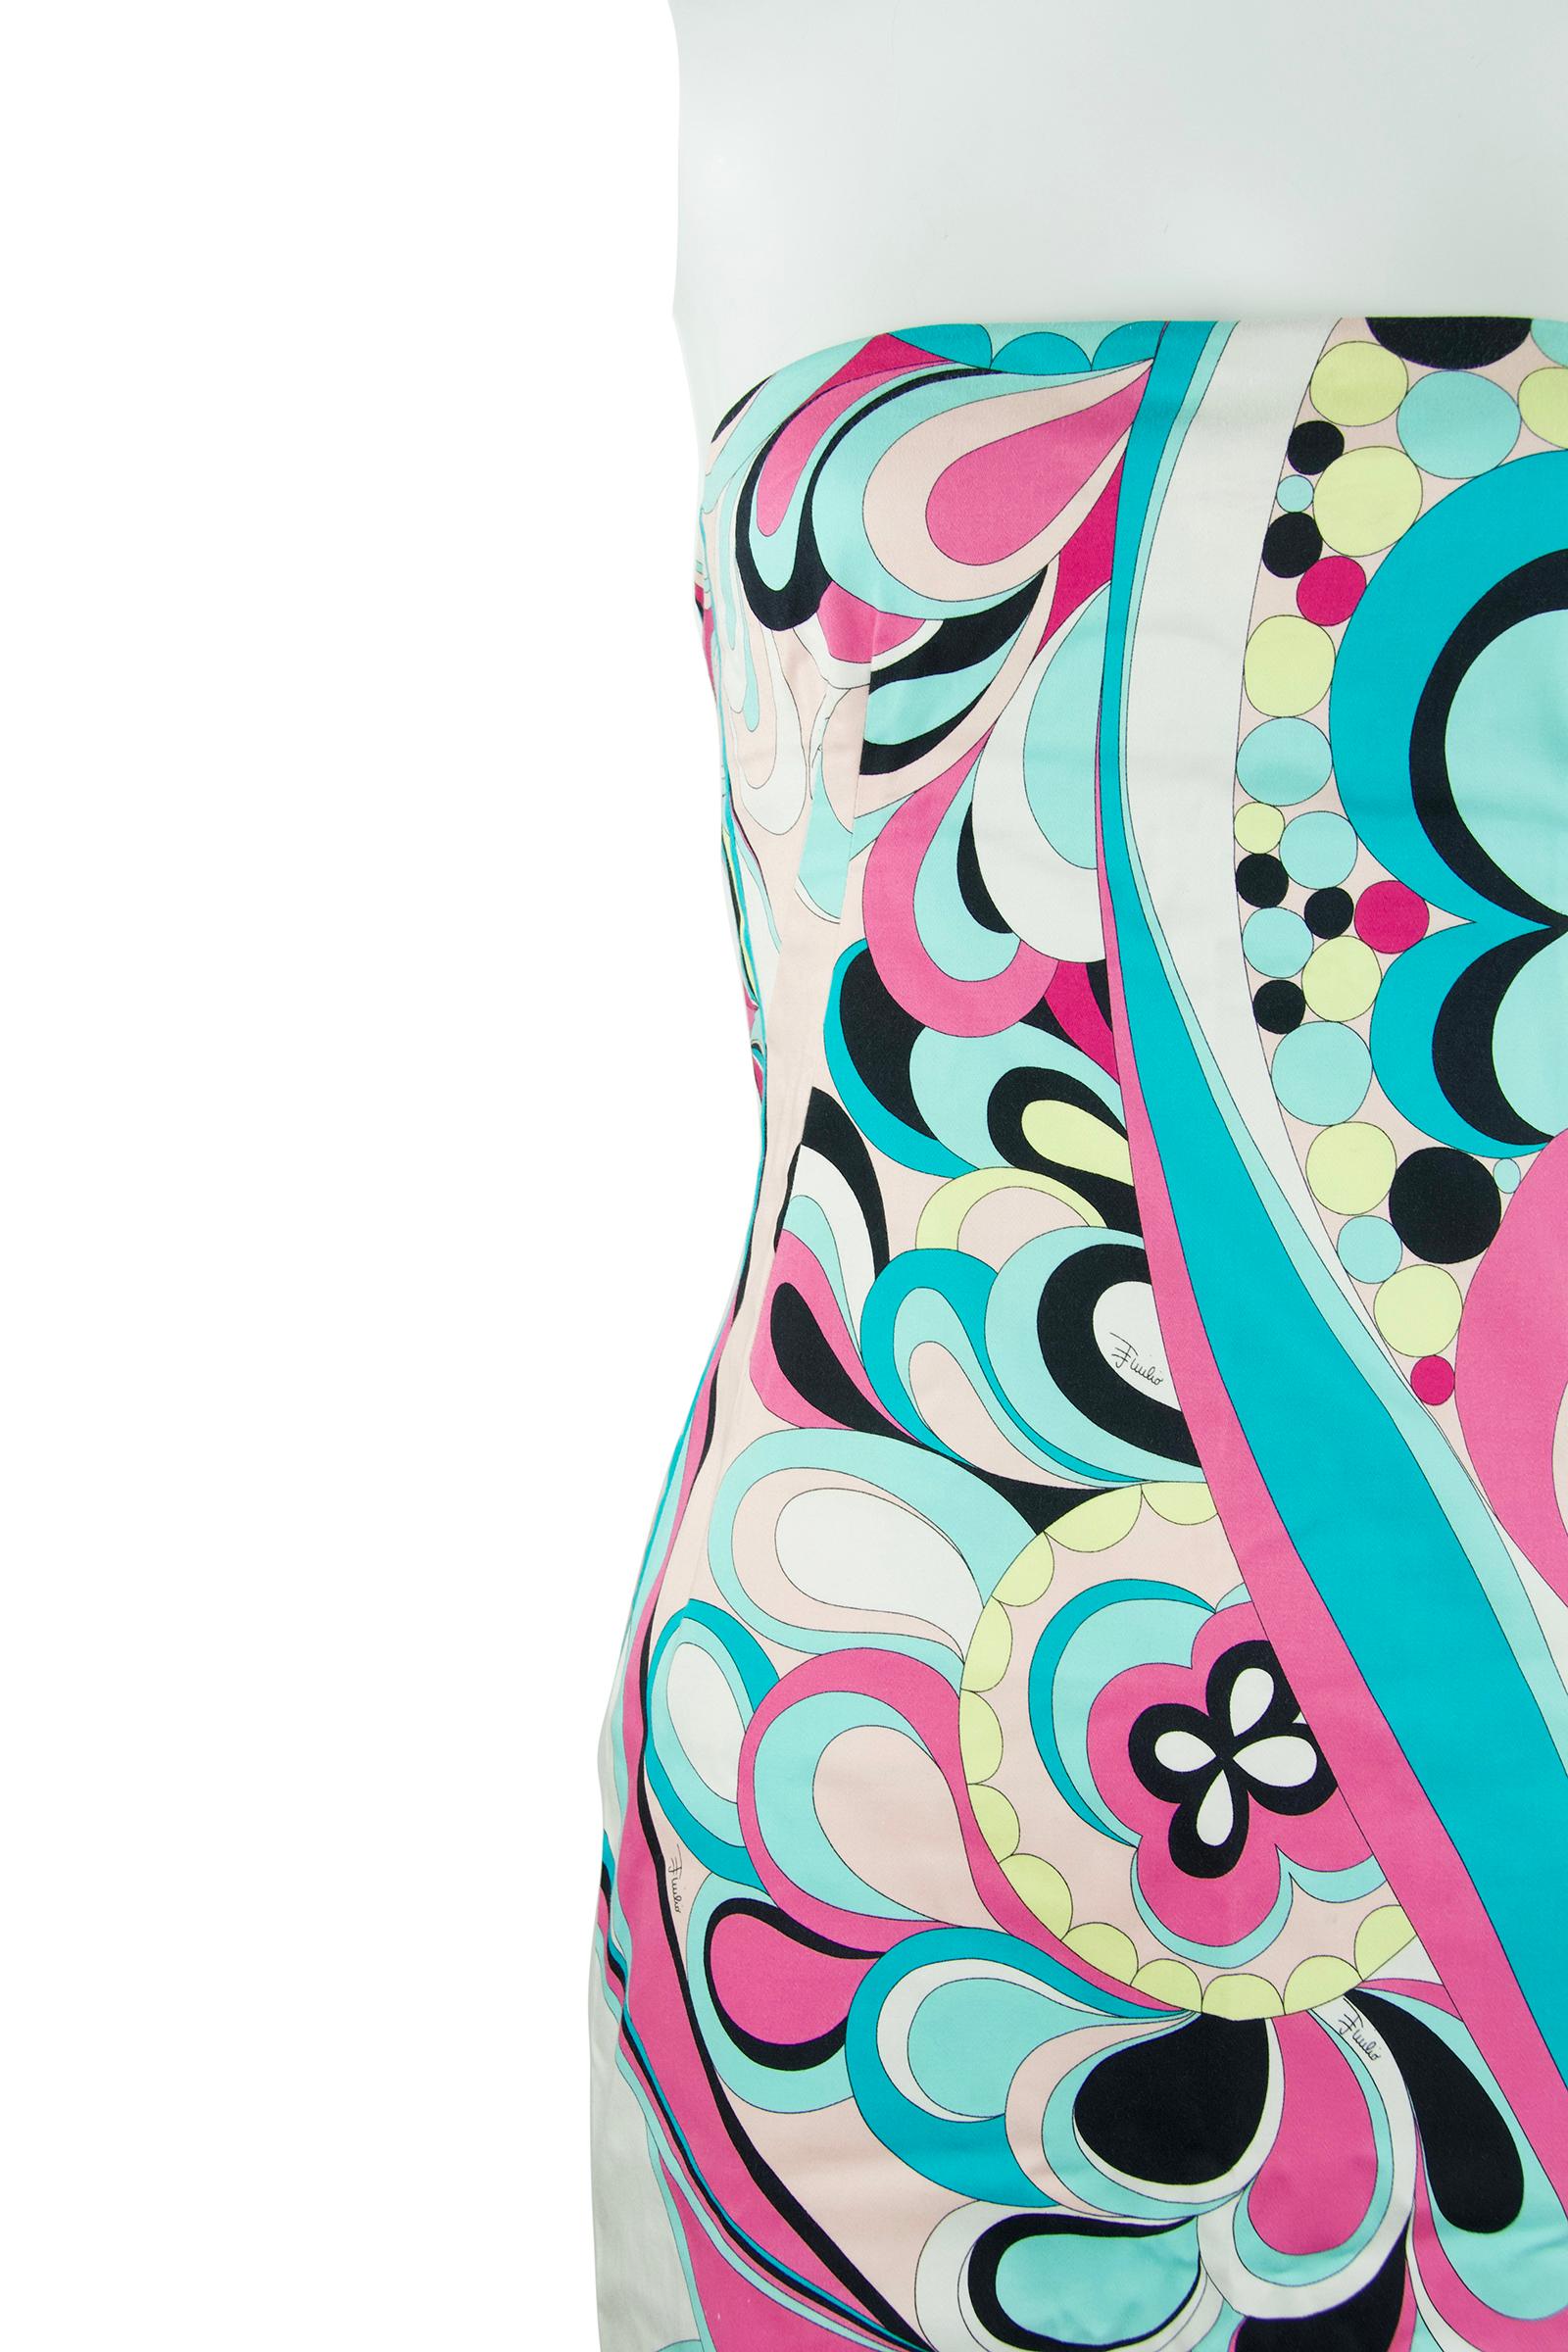 Women's Pucci Multicolored Printed Strapless Dress - Size 6 For Sale